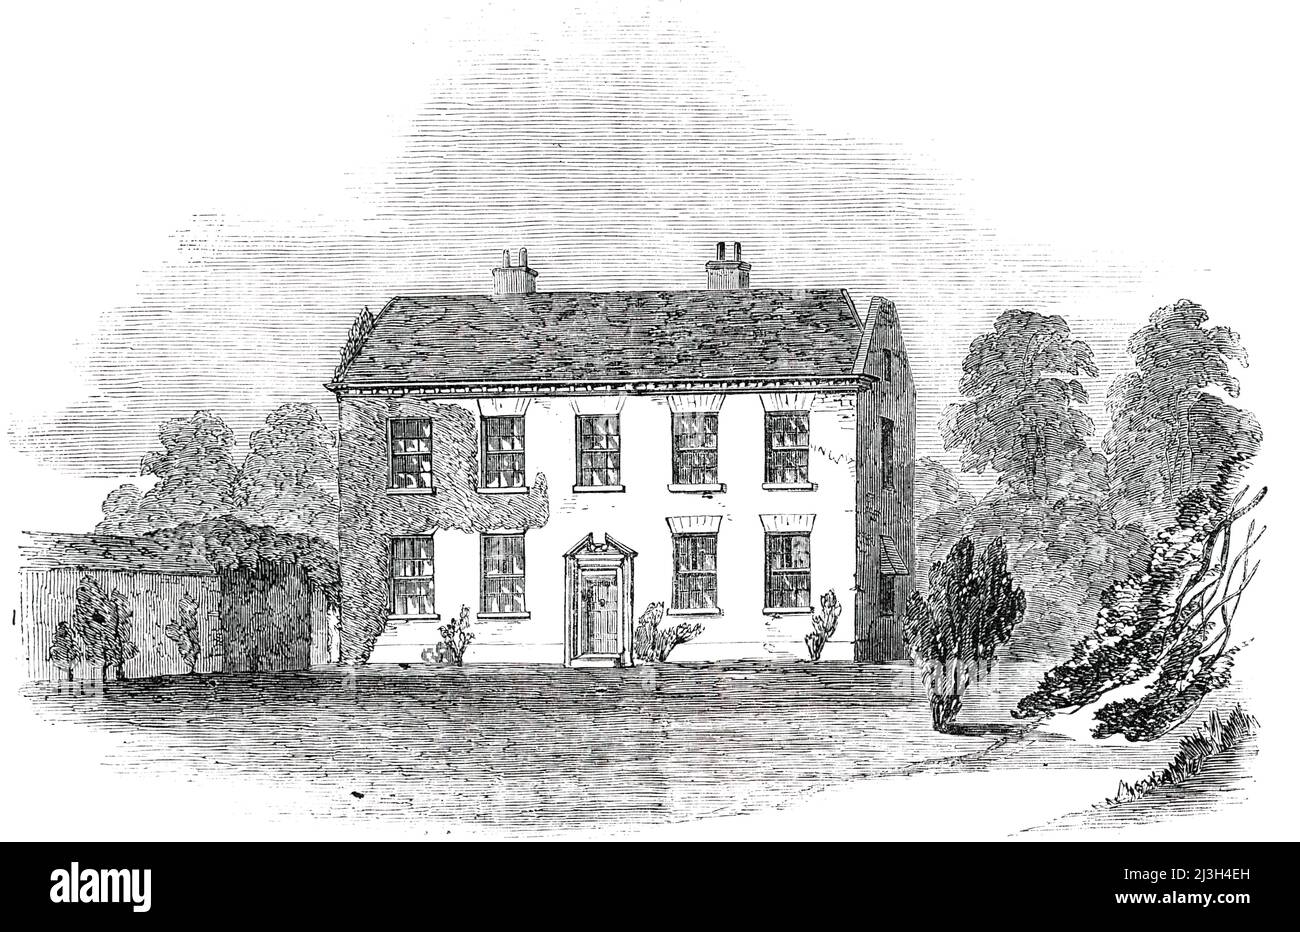 The Parsonage, at Frimley, 1850. 'The quiet little village of Frimley, in Surrey, has been the scene of a frightful crime - a daring burglary, which has unfortunately terminated in the violent death of a venerable and much-respected clergyman, the Rev. George Edward Hollest, who has held the perpetual curacy of this hamlet during the past seventeen years...About three o'clock in the morning, Mr. and Mrs. Hollest were awoke by the noise arising from the presence of two or three burglars in their chamber, and in their attempts to raise an alarm, a pistol or gun-shot wound was inflicted on Mr. Ho Stock Photo